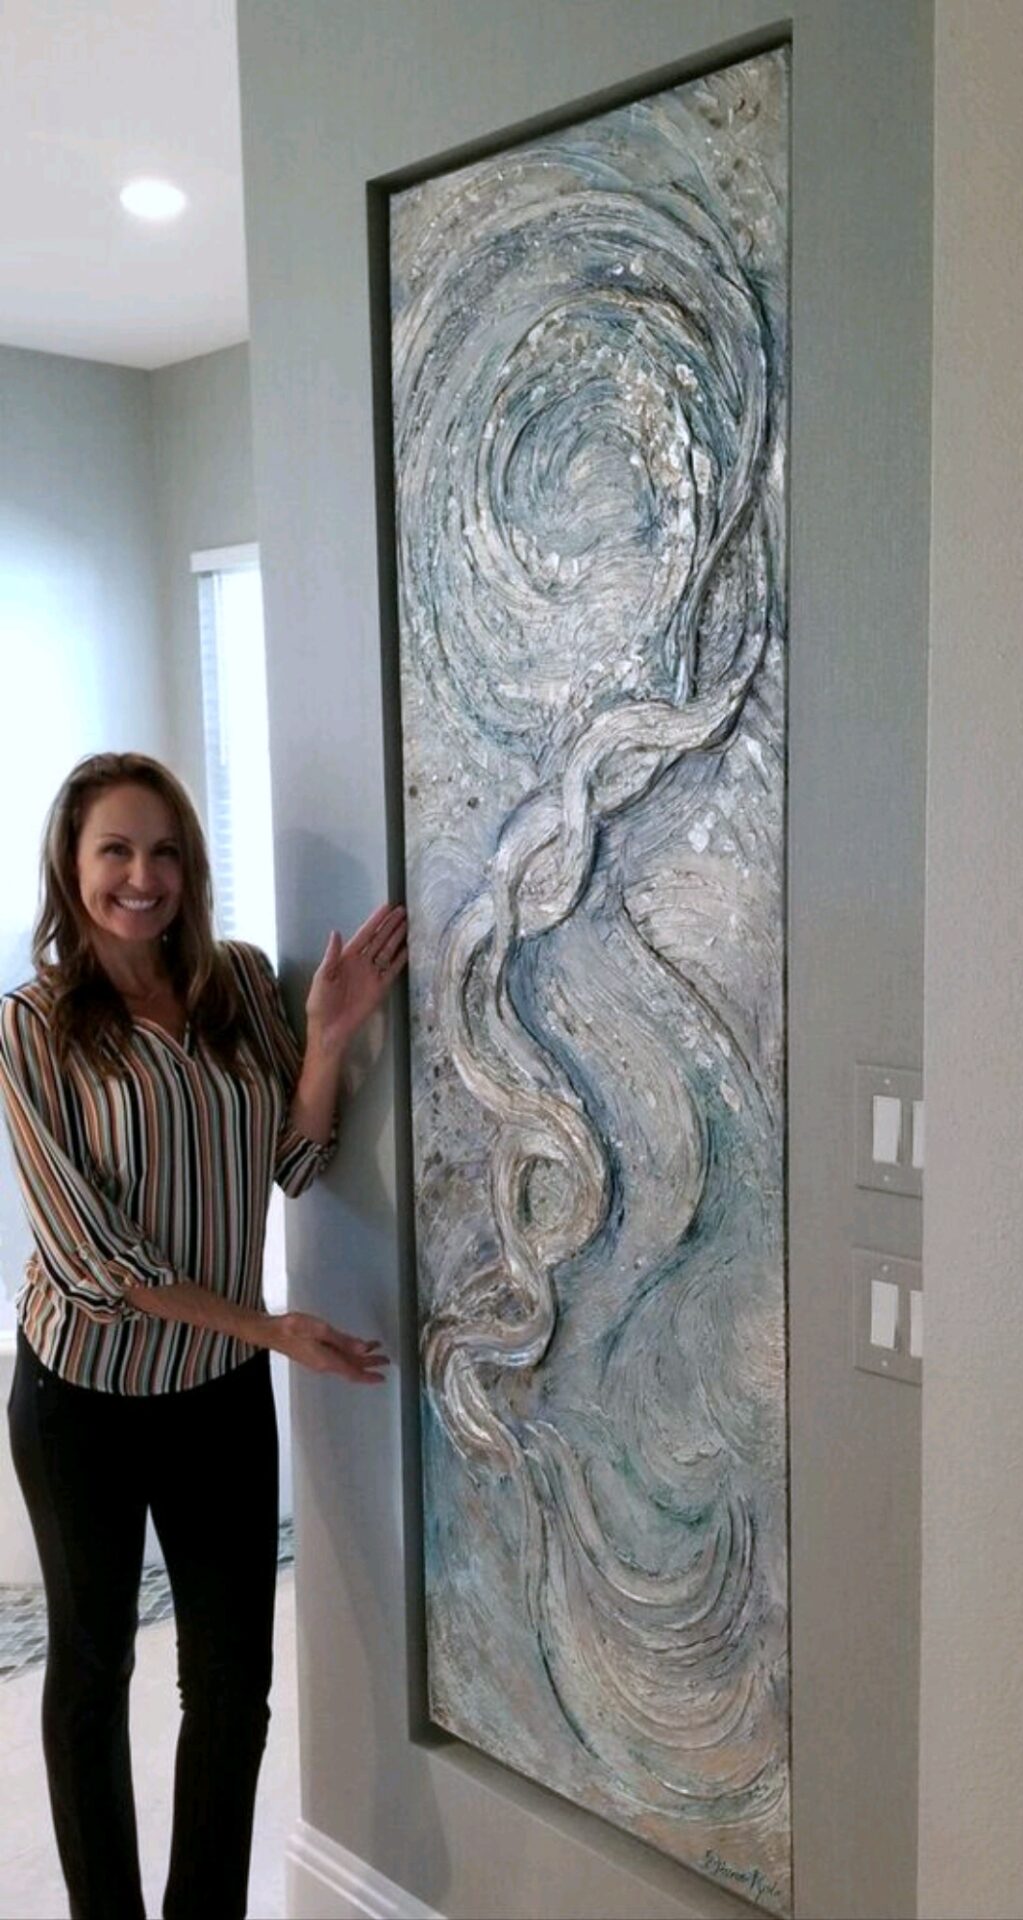 Diane Kole showcasing her beautiful wall carving made of crystals